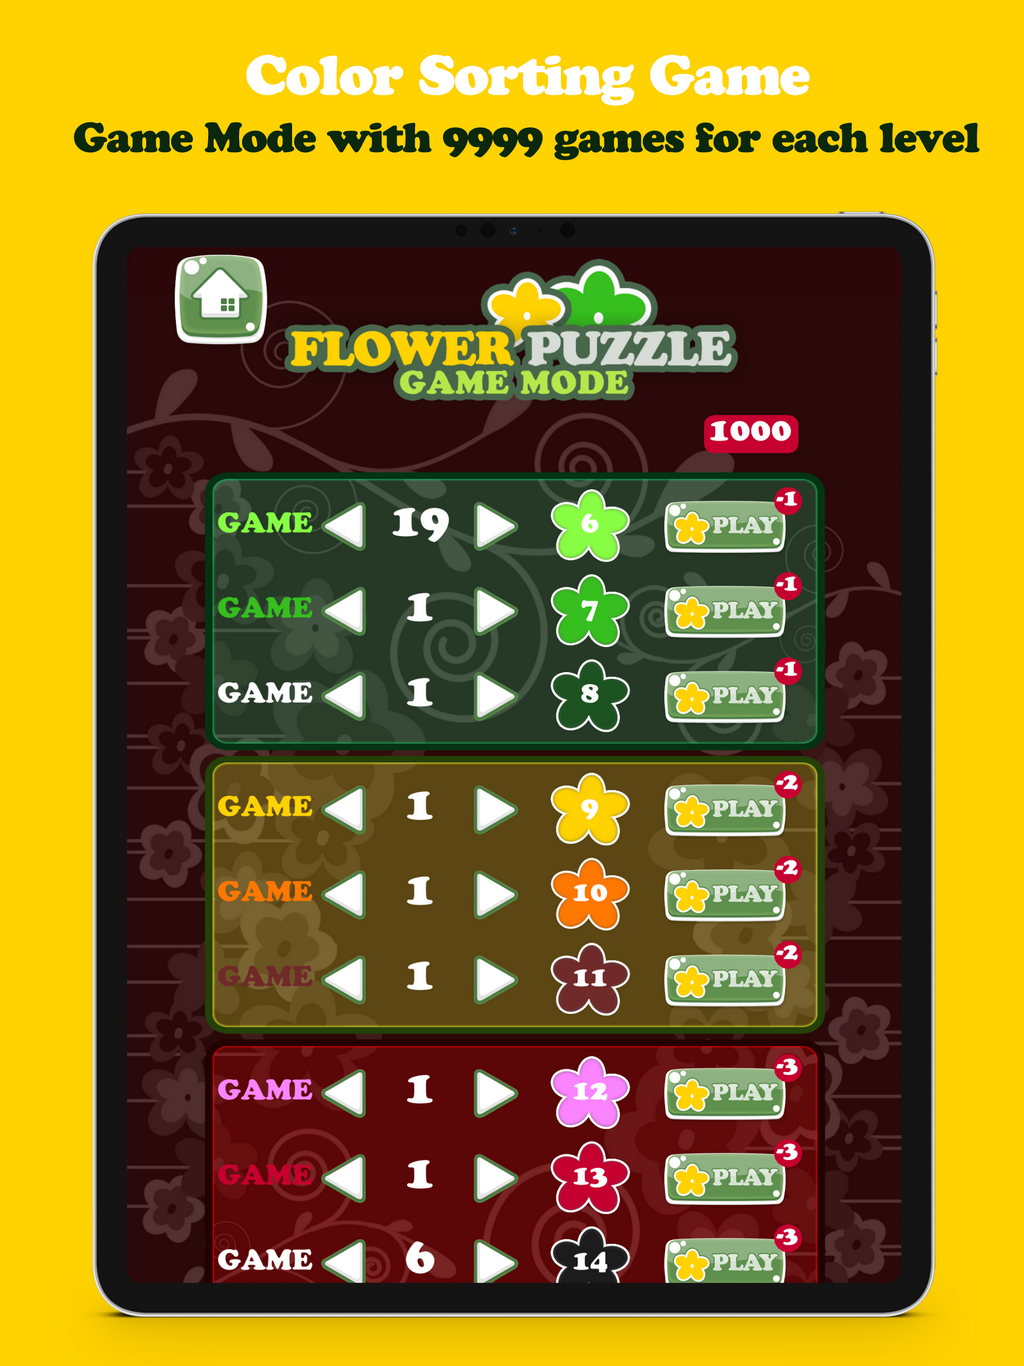 Flower Sort Puzzle - Color Sorting Game